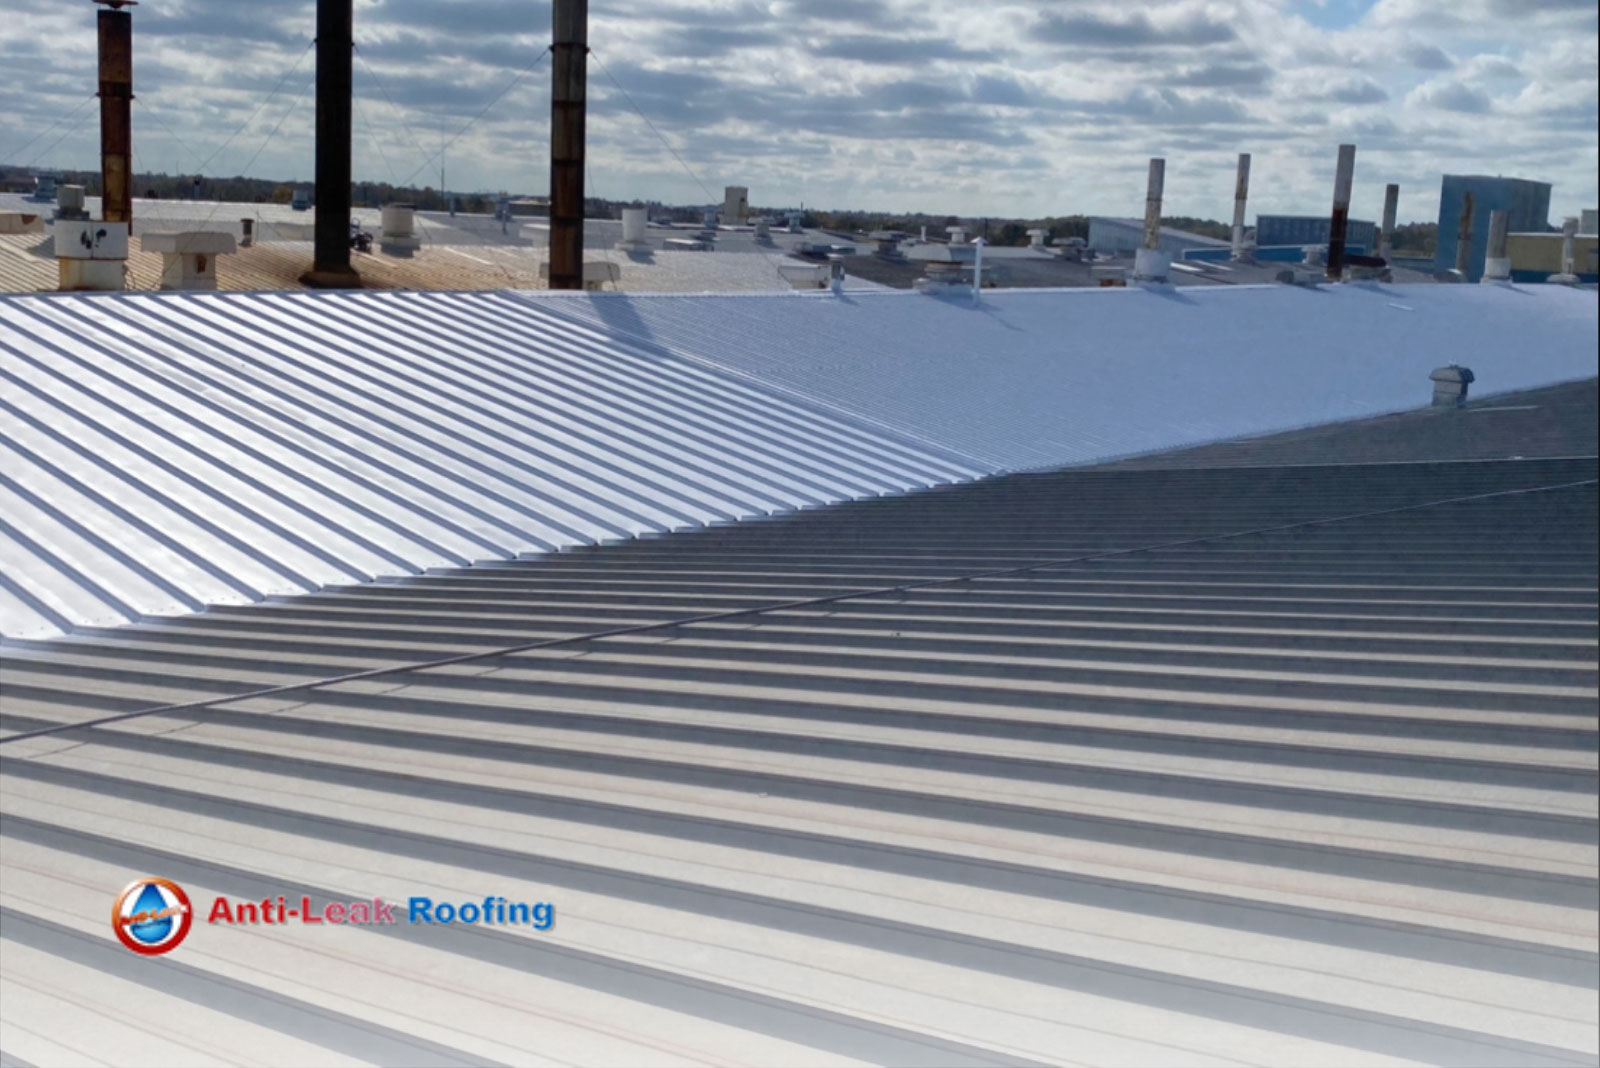 An image of a roof with metal roofing.